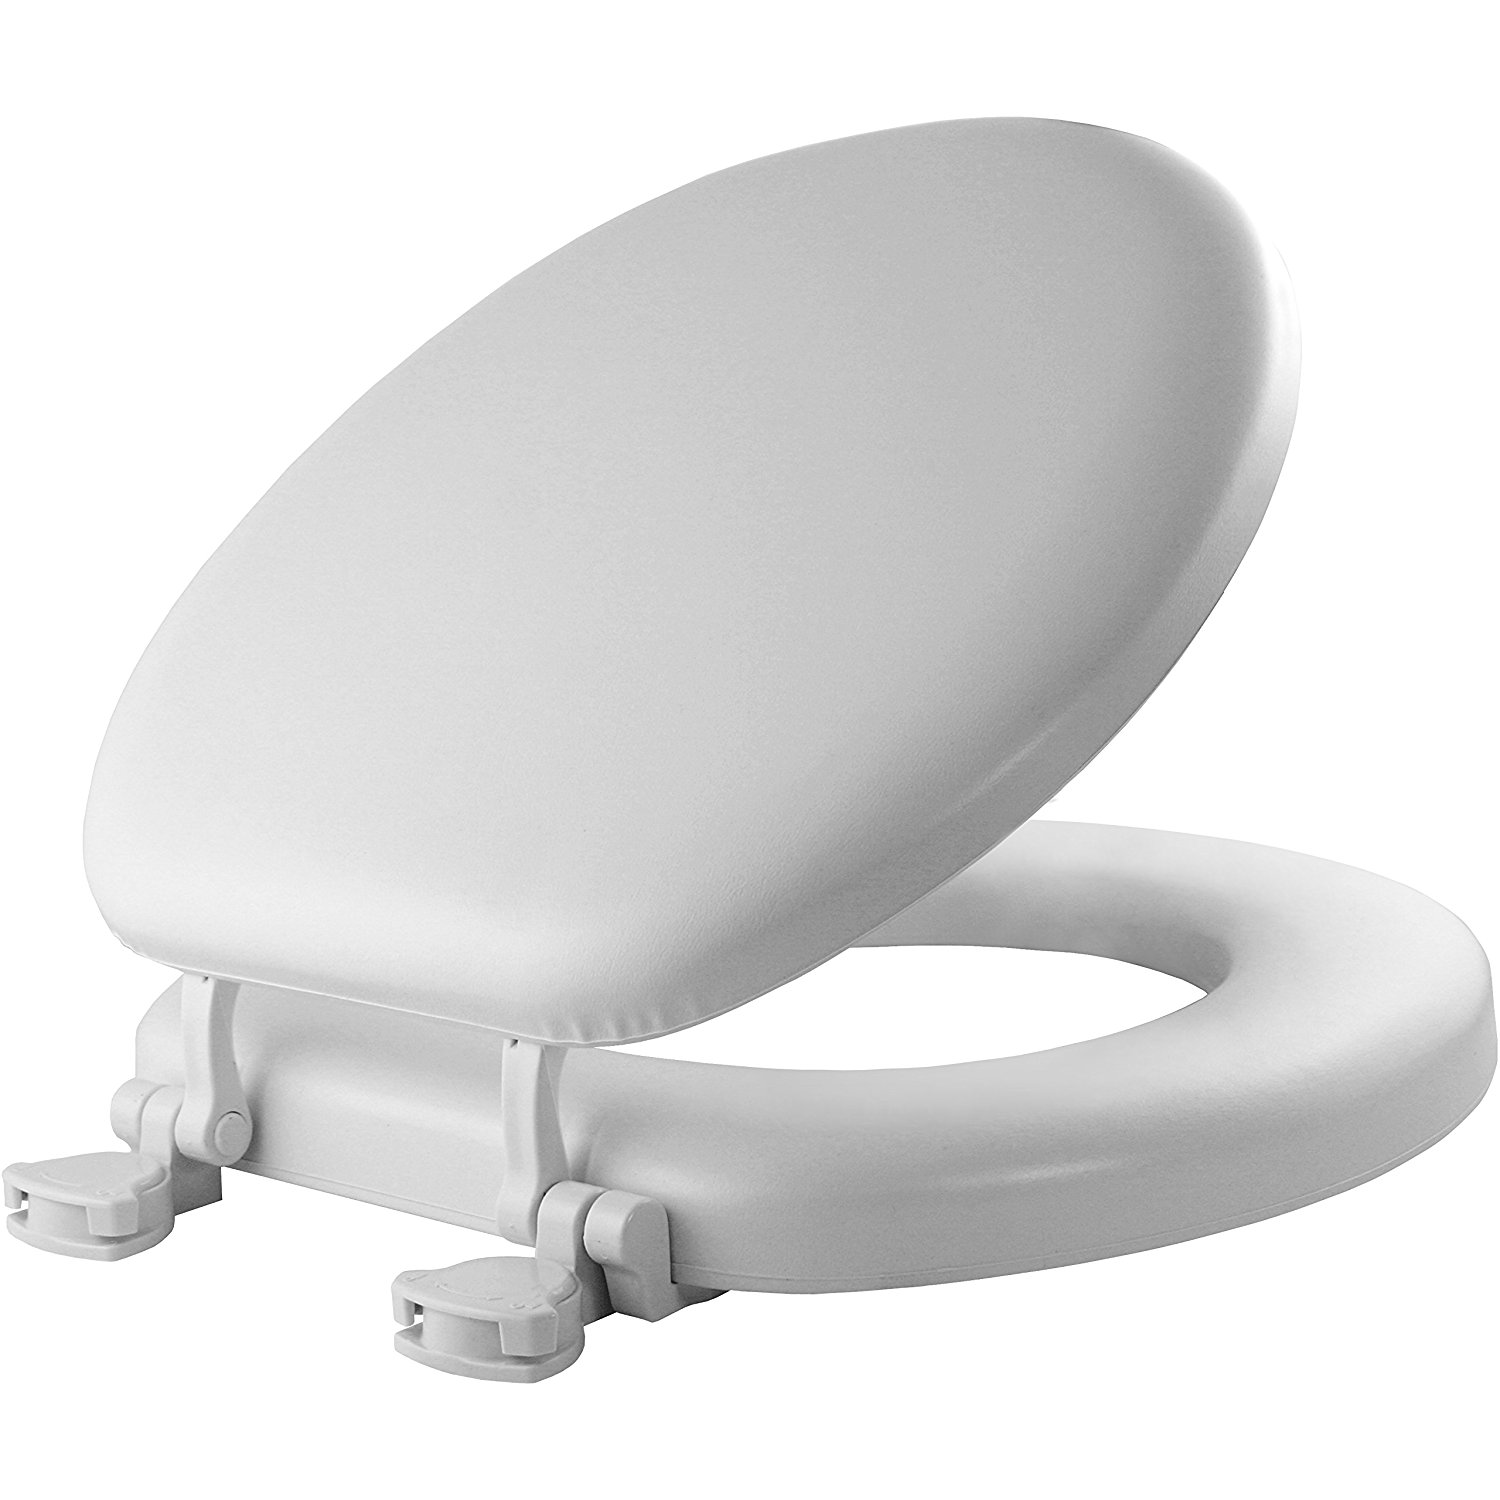 Mayfair 13EC 000 Soft Toilet Seat with Molded Wood Core and Easy-Clean & Change Hinges, Round, White